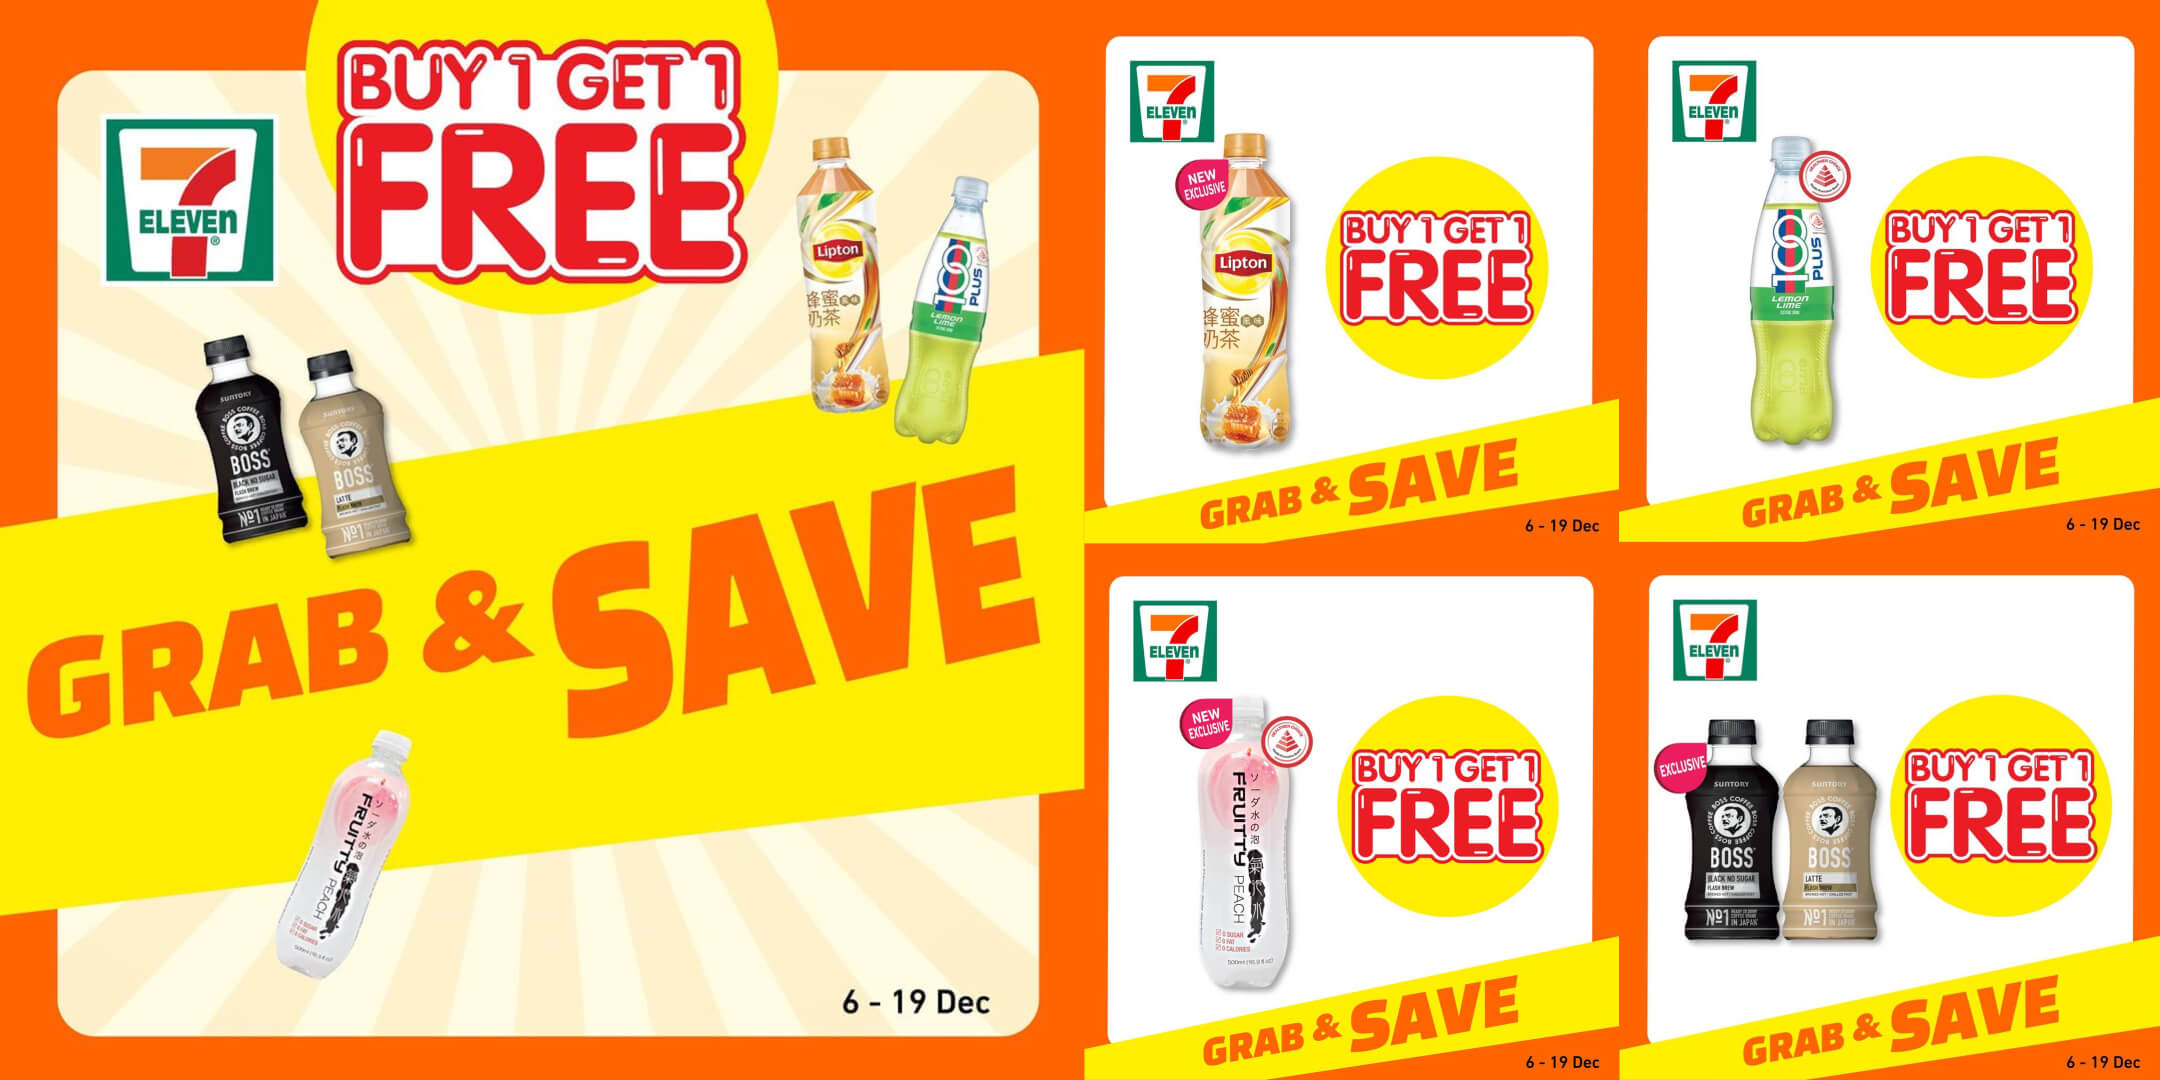 7-Eleven,BUY 1 GET 1 FREE on your favourite beverages